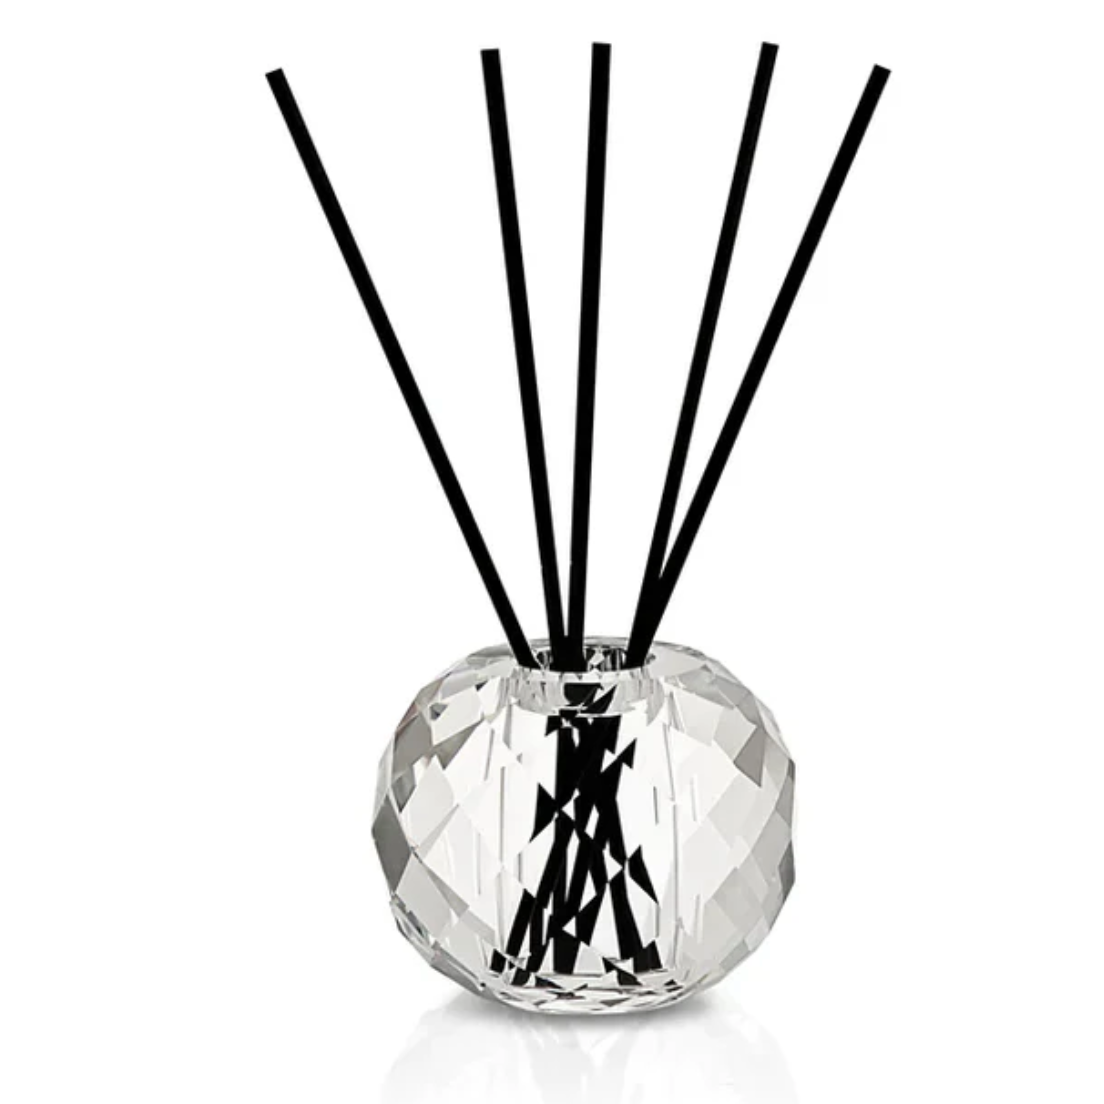 Crystallo Orb Reed Diffuser – 4oz. – Bubbly Glory